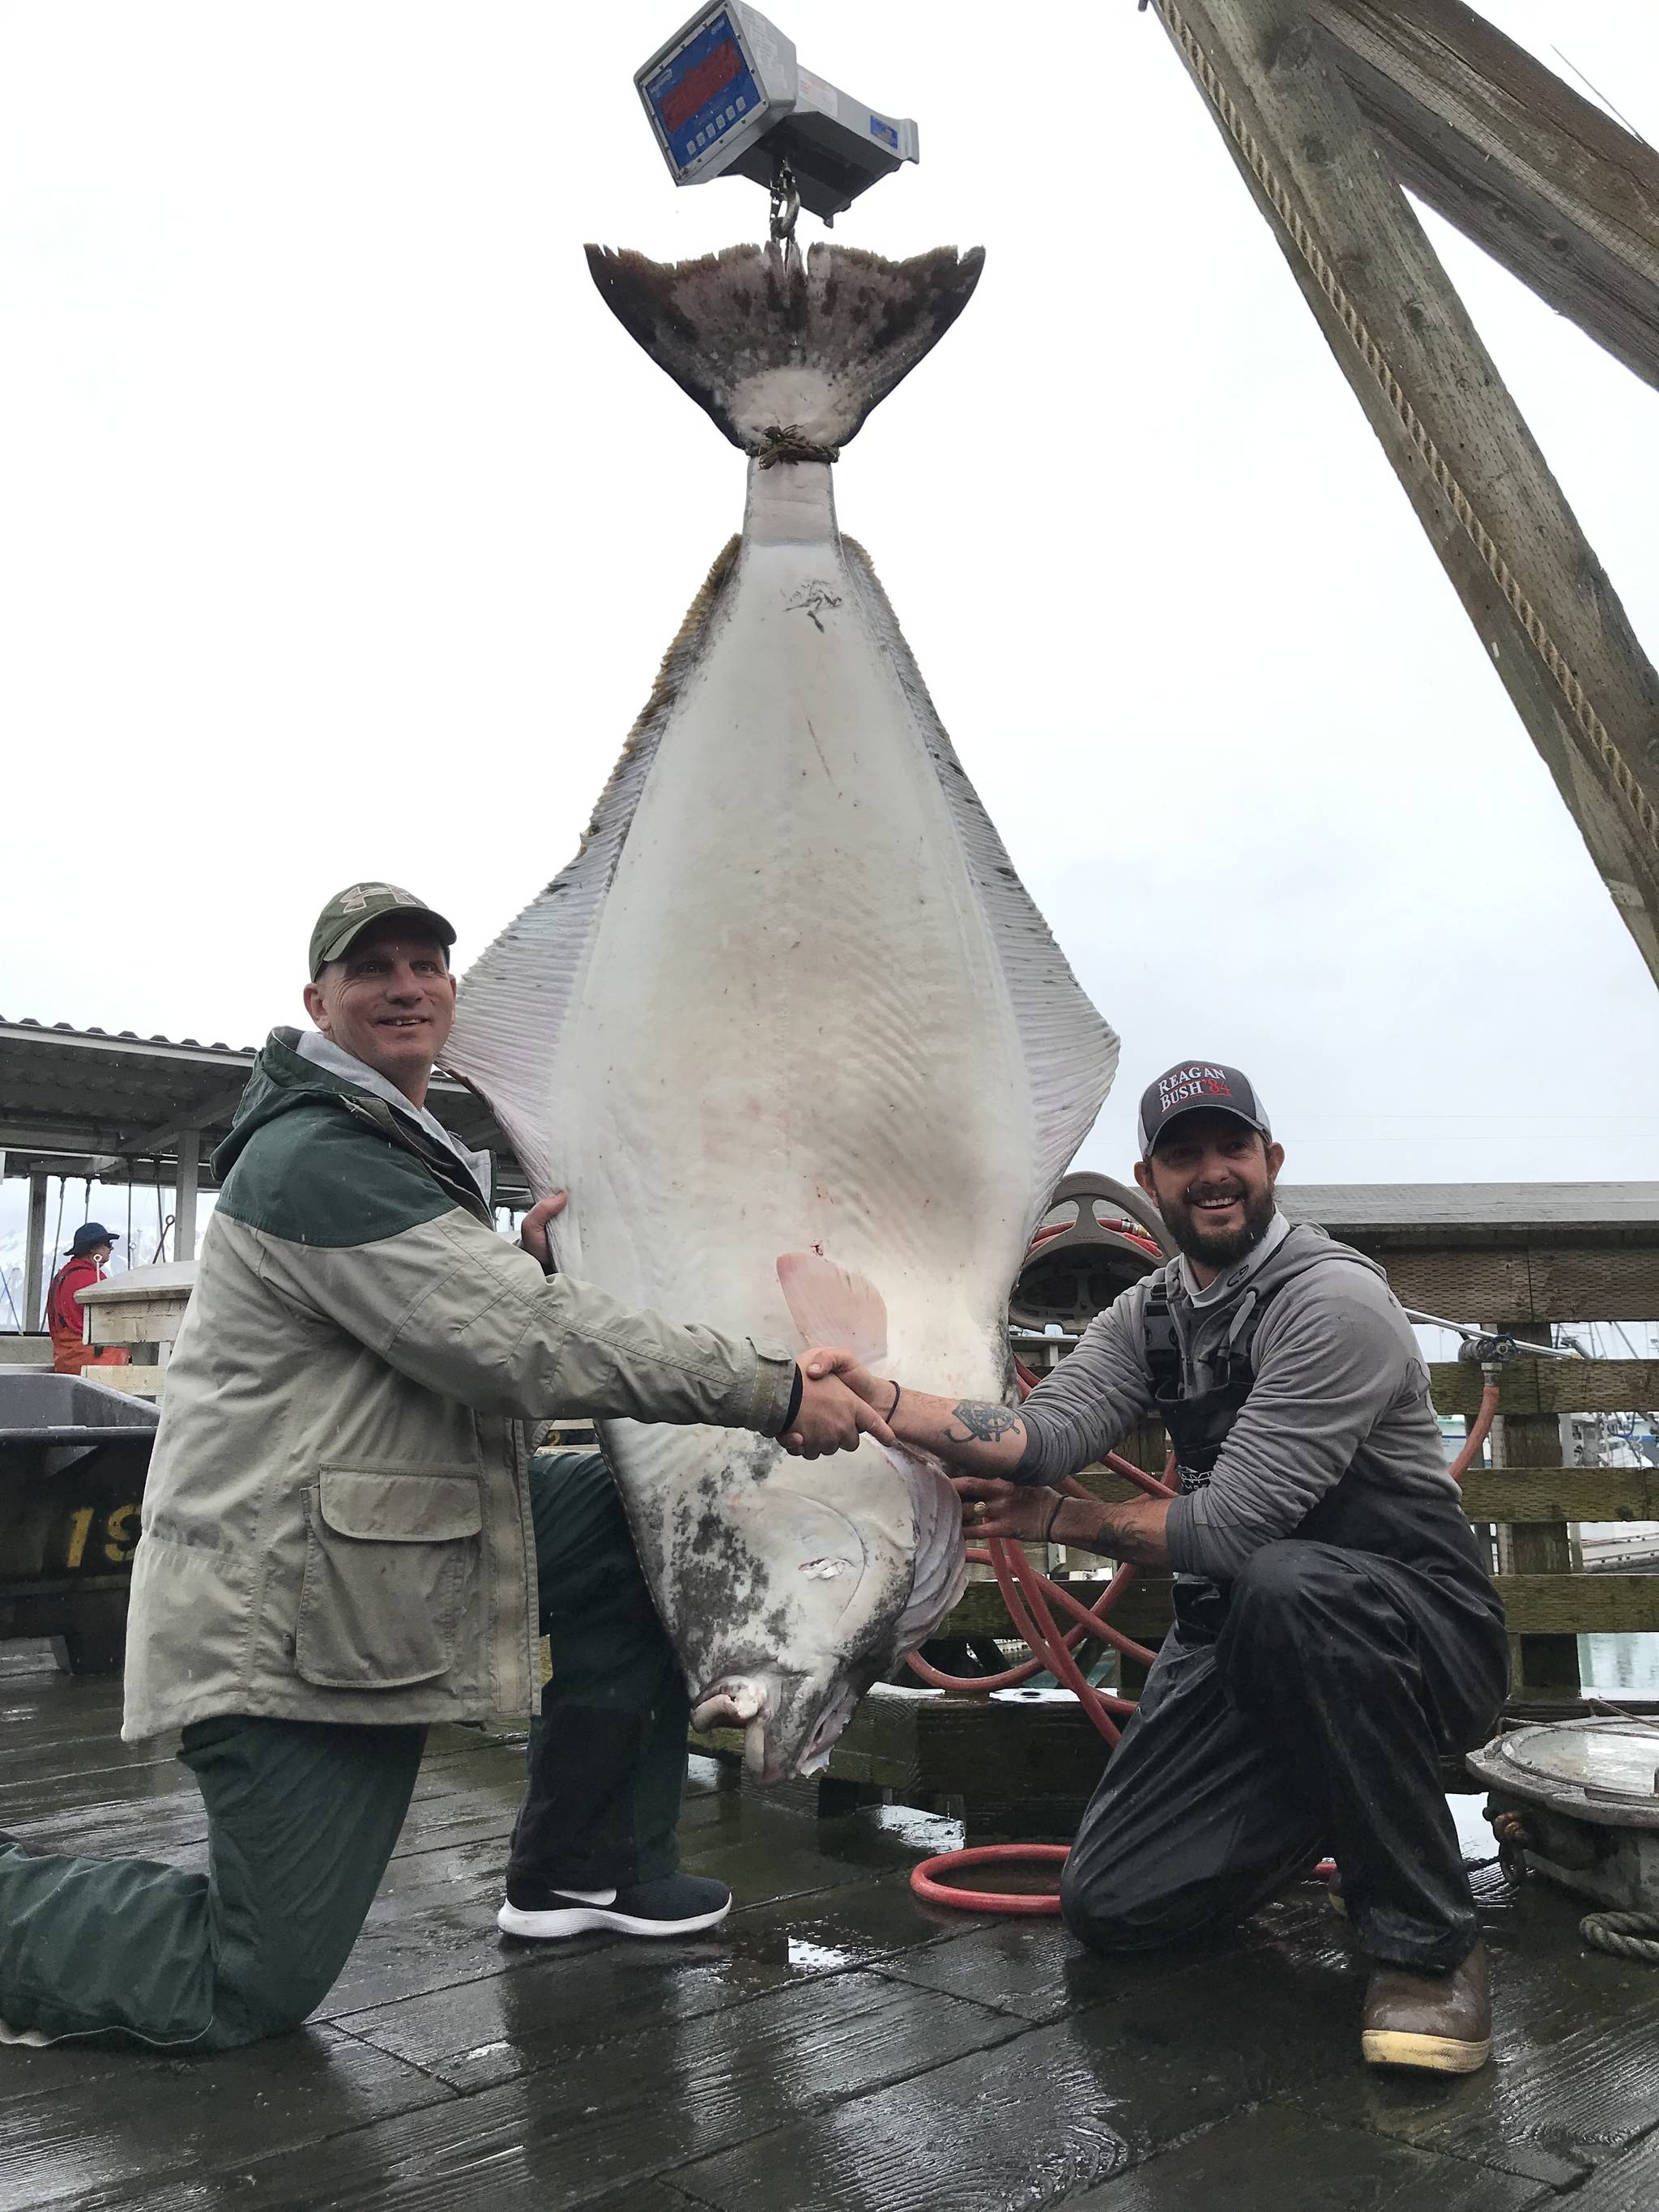 The winning fish in this year’s halibut tournament was reeled in by Guy Minske, left, and weighed 257.8 pounds. (Photo submitted by Seward Chamber of Commerce)